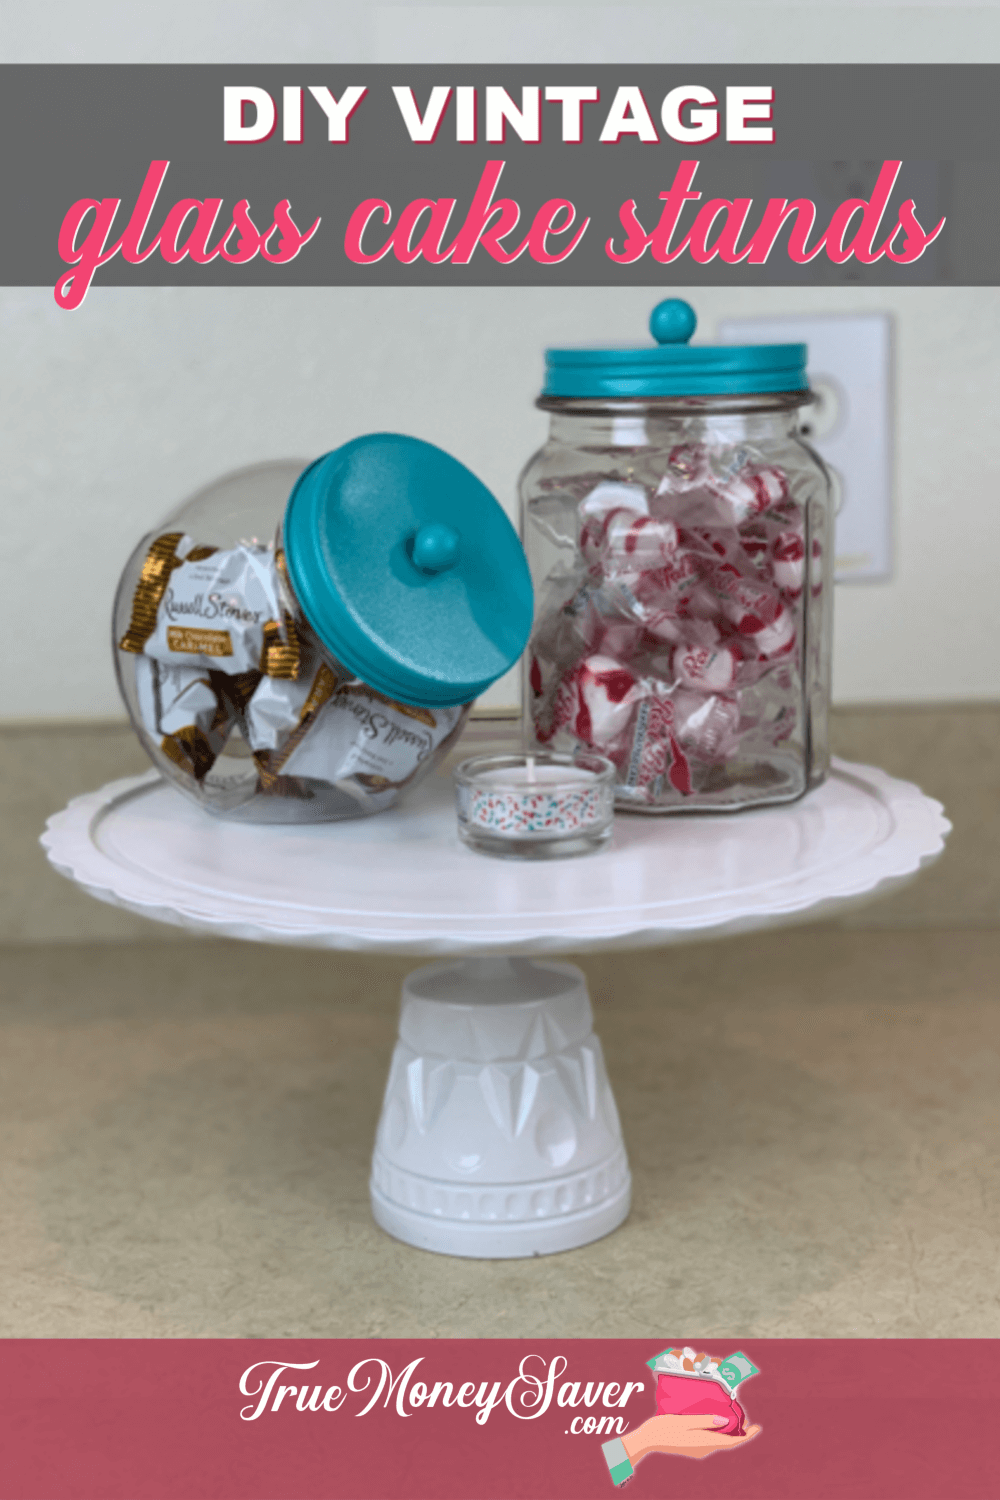 DIY easy cake stand